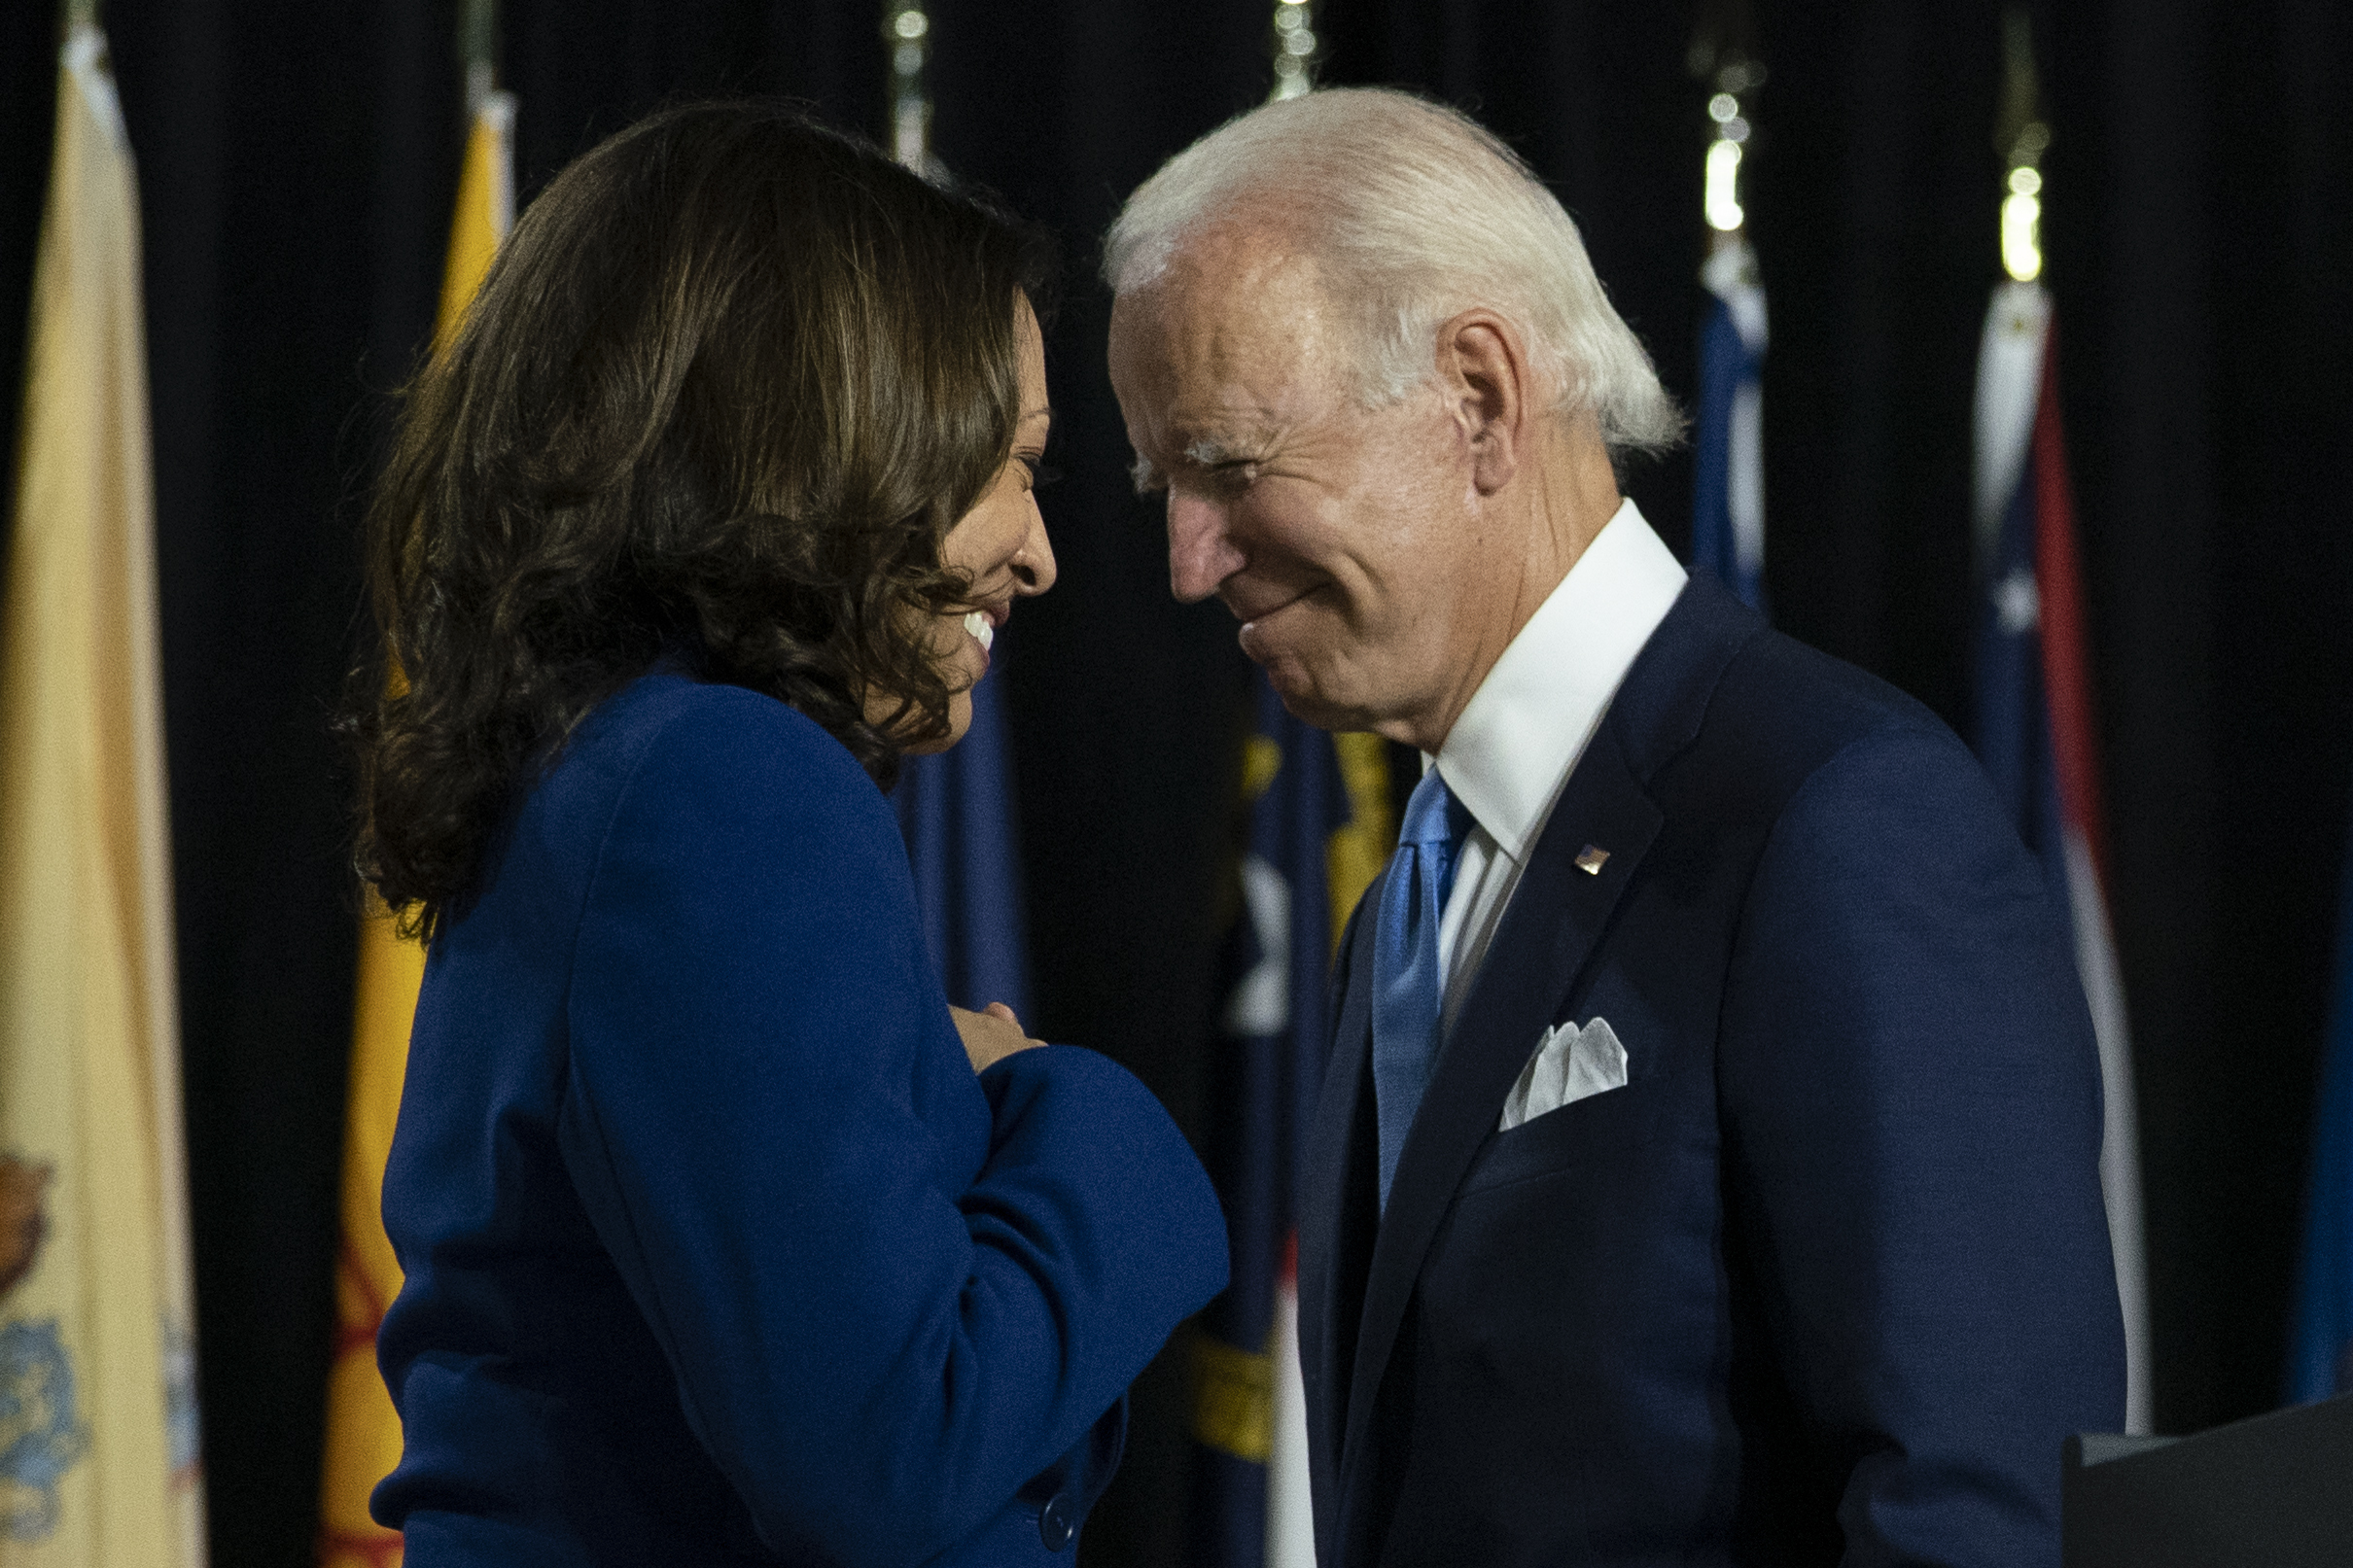 when did joe biden decide tonot run for president - Biden|President|Joe|Years|Trump|Delaware|Vice|Time|Obama|Senate|States|Law|Age|Campaign|Election|Administration|Family|House|Senator|Office|School|Wife|People|Hunter|University|Act|State|Year|Life|Party|Committee|Children|Beau|Daughter|War|Jill|Day|Facts|Americans|Presidency|Joe Biden|United States|Vice President|White House|Law School|President Trump|Foreign Relations Committee|Donald Trump|President Biden|Presidential Campaign|Presidential Election|Democratic Party|Syracuse University|United Nations|Net Worth|Barack Obama|Judiciary Committee|Neilia Hunter|U.S. Senate|Hillary Clinton|New York Times|Obama Administration|Empty Store Shelves|Systemic Racism|Castle County Council|Archmere Academy|U.S. Senator|Vice Presidency|Second Term|Biden Administration